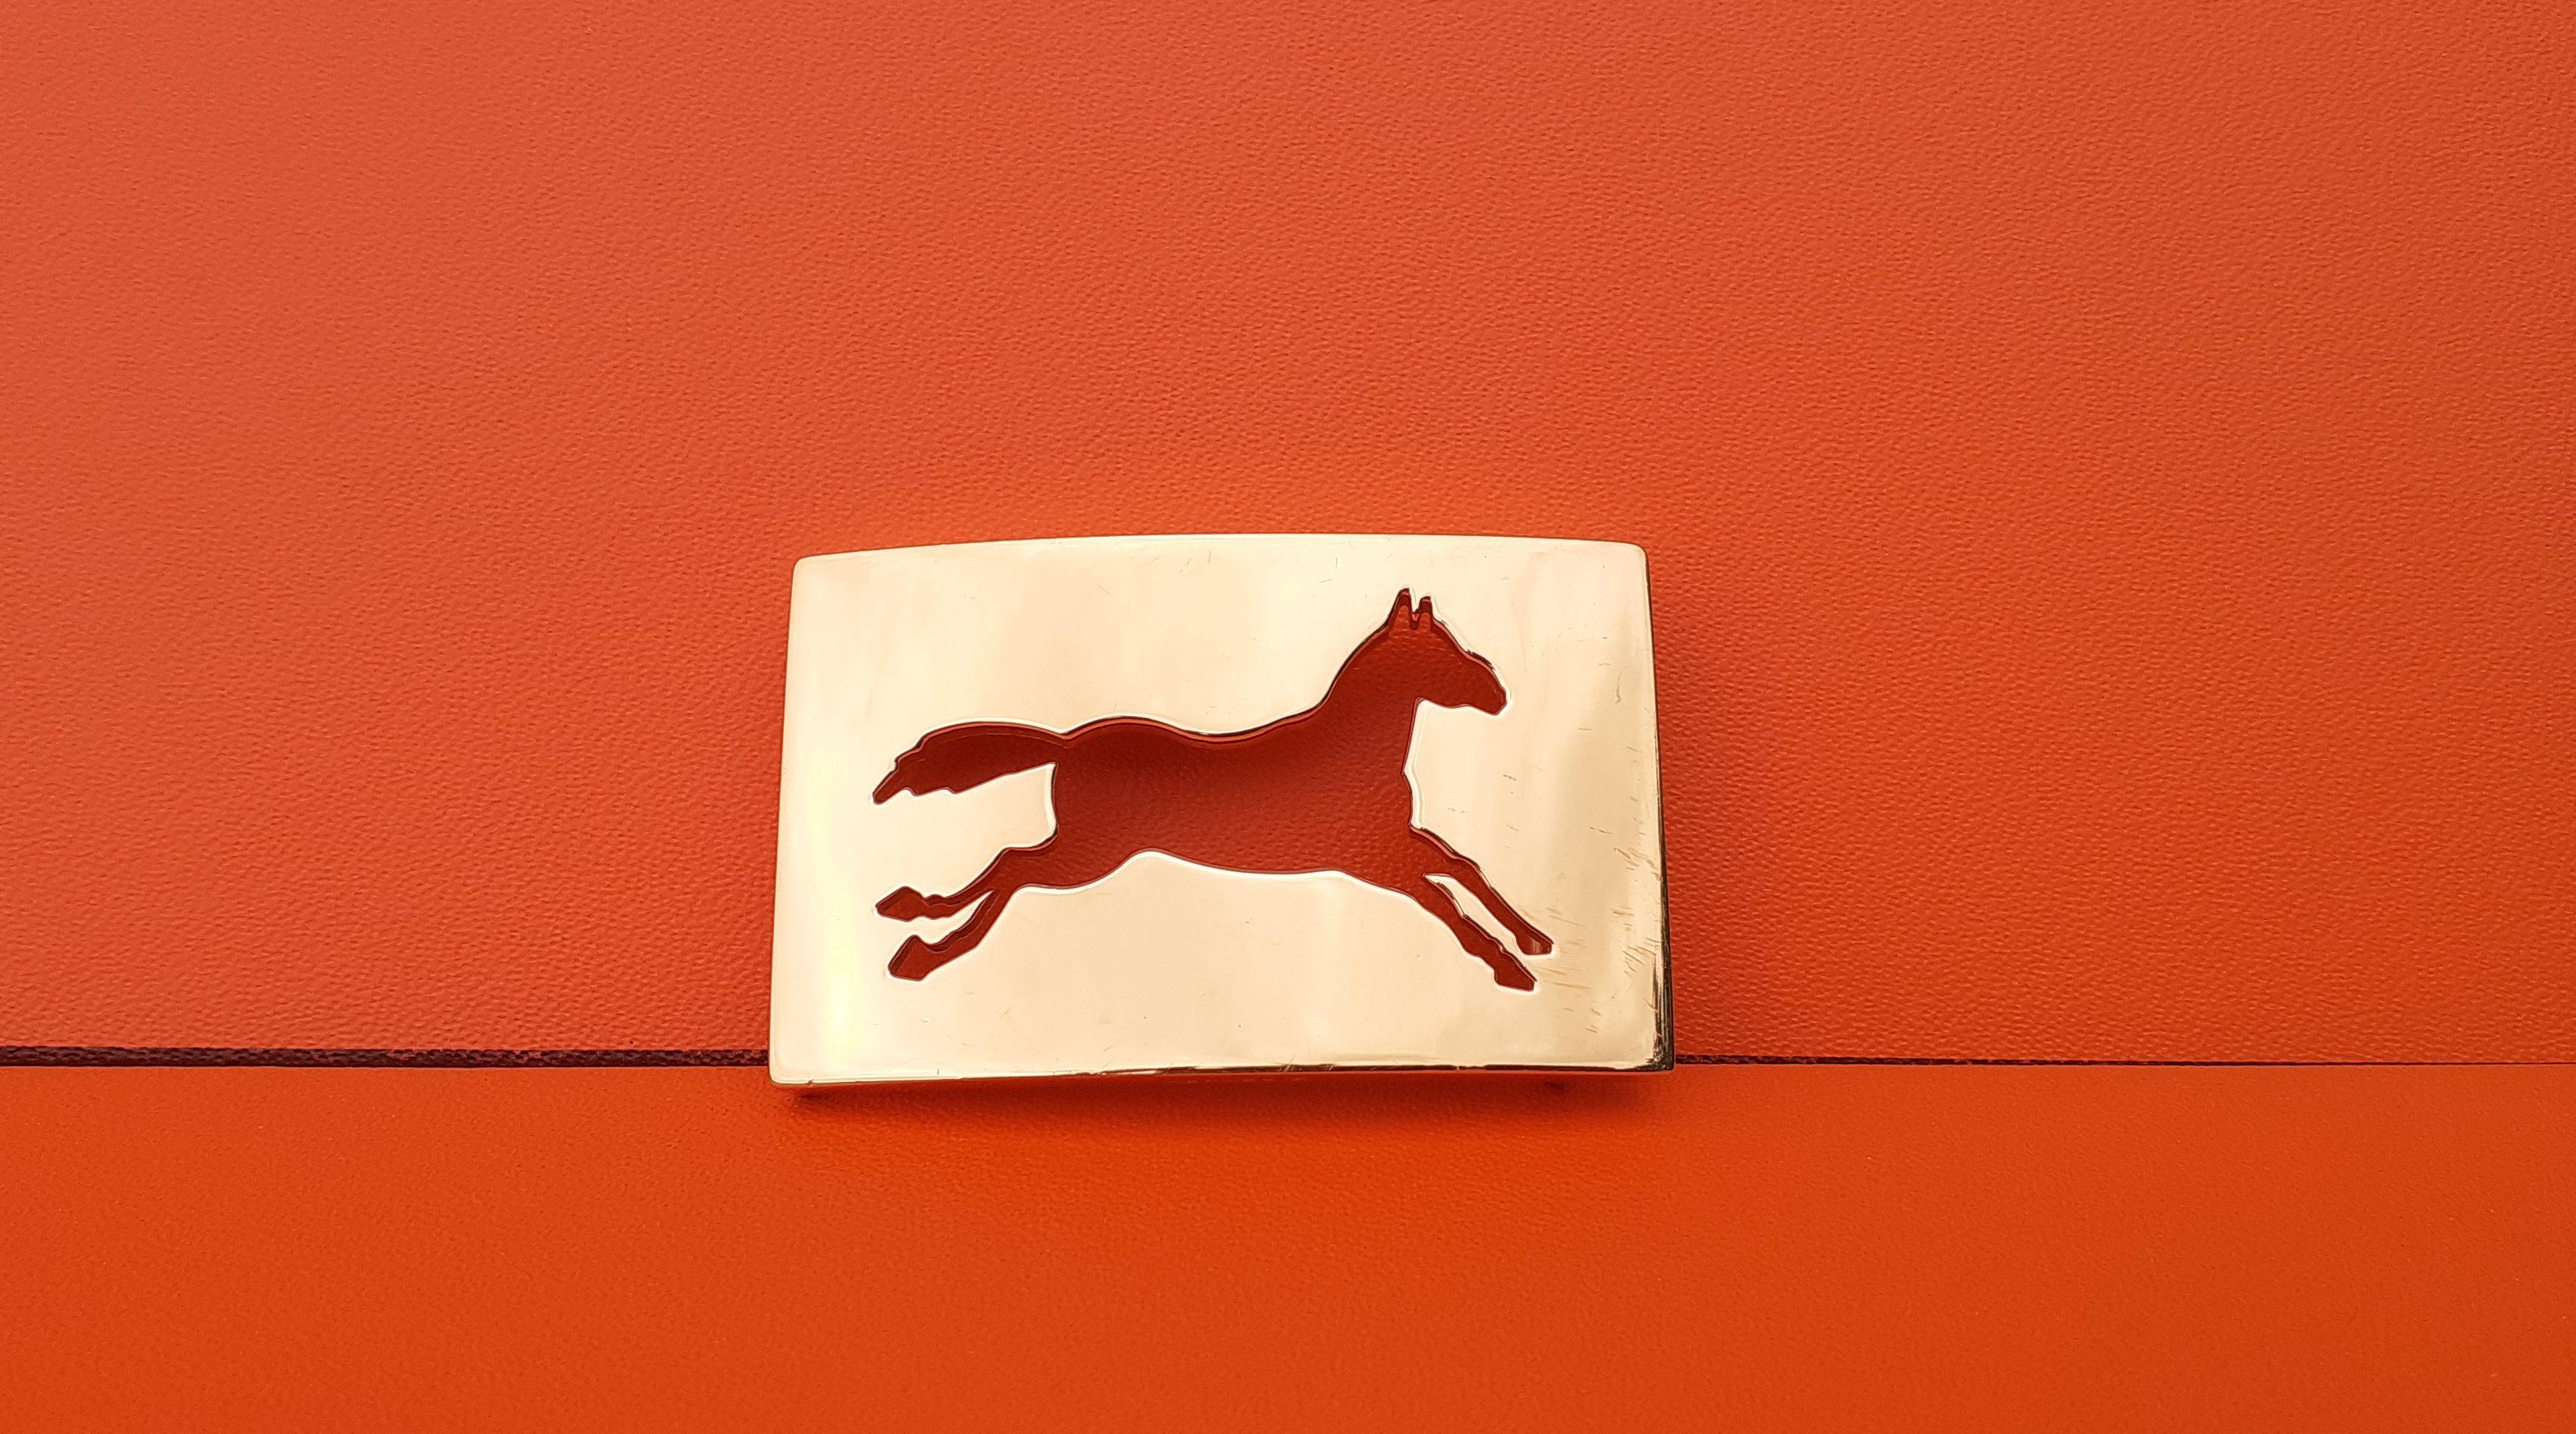 Extremely Rare Authentic Hermès Belt Buckle

Rectangular in shape with an openwork horse in its center

Made of shiny gold plated metal

Vintage item

